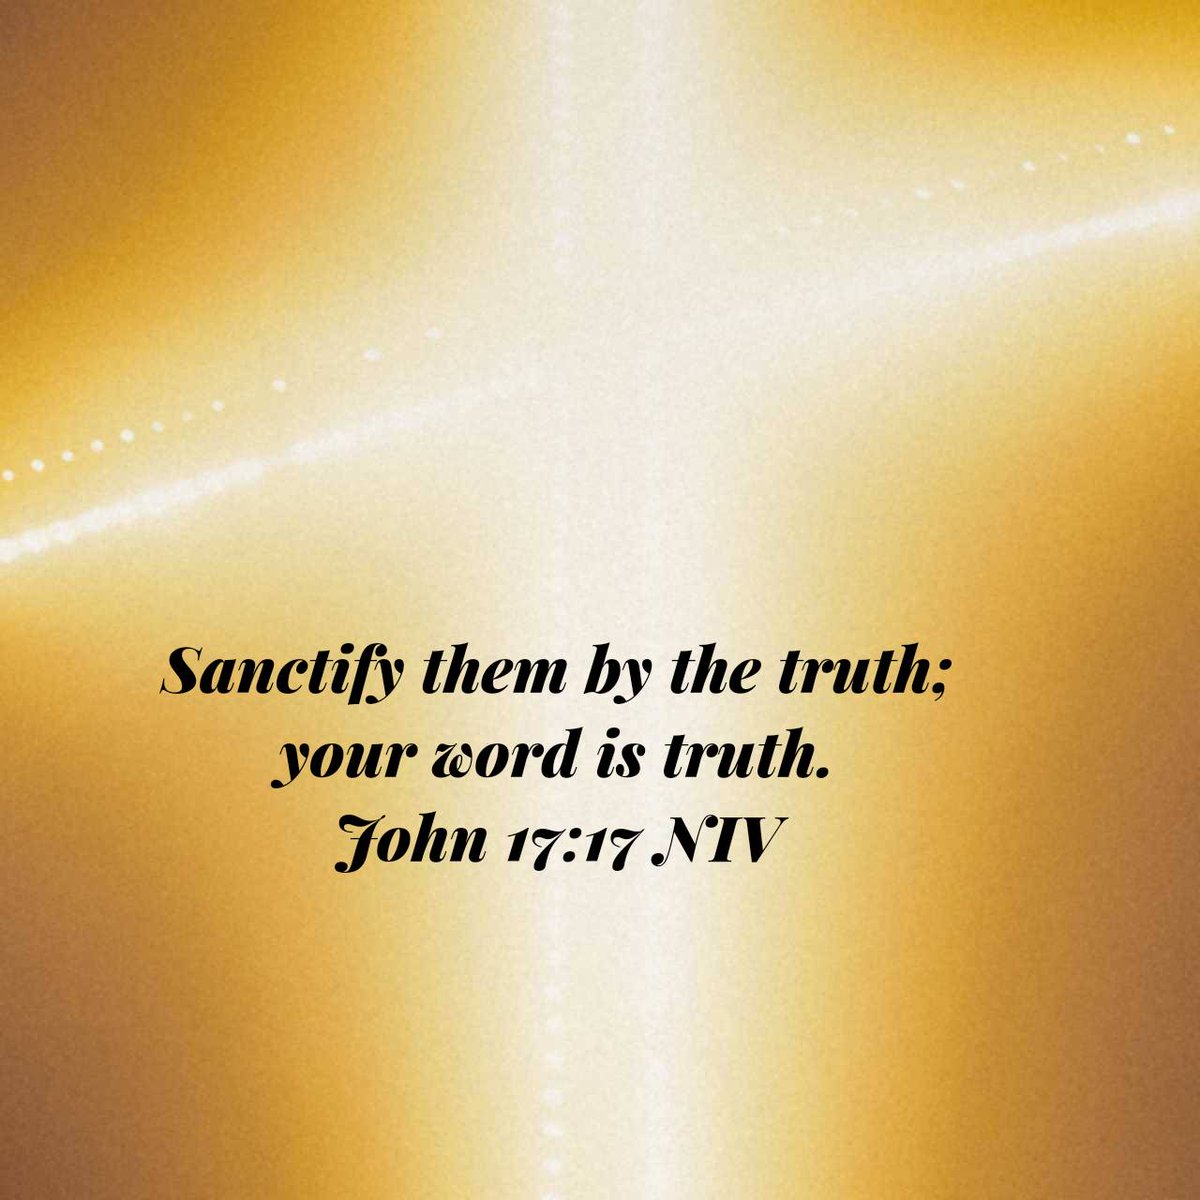 John 17:17 NIV
#DailyDevotional
#WalkThruTheBible

Sanctify them by the truth; your word is truth. 

bible.com/bible/111/jhn.…